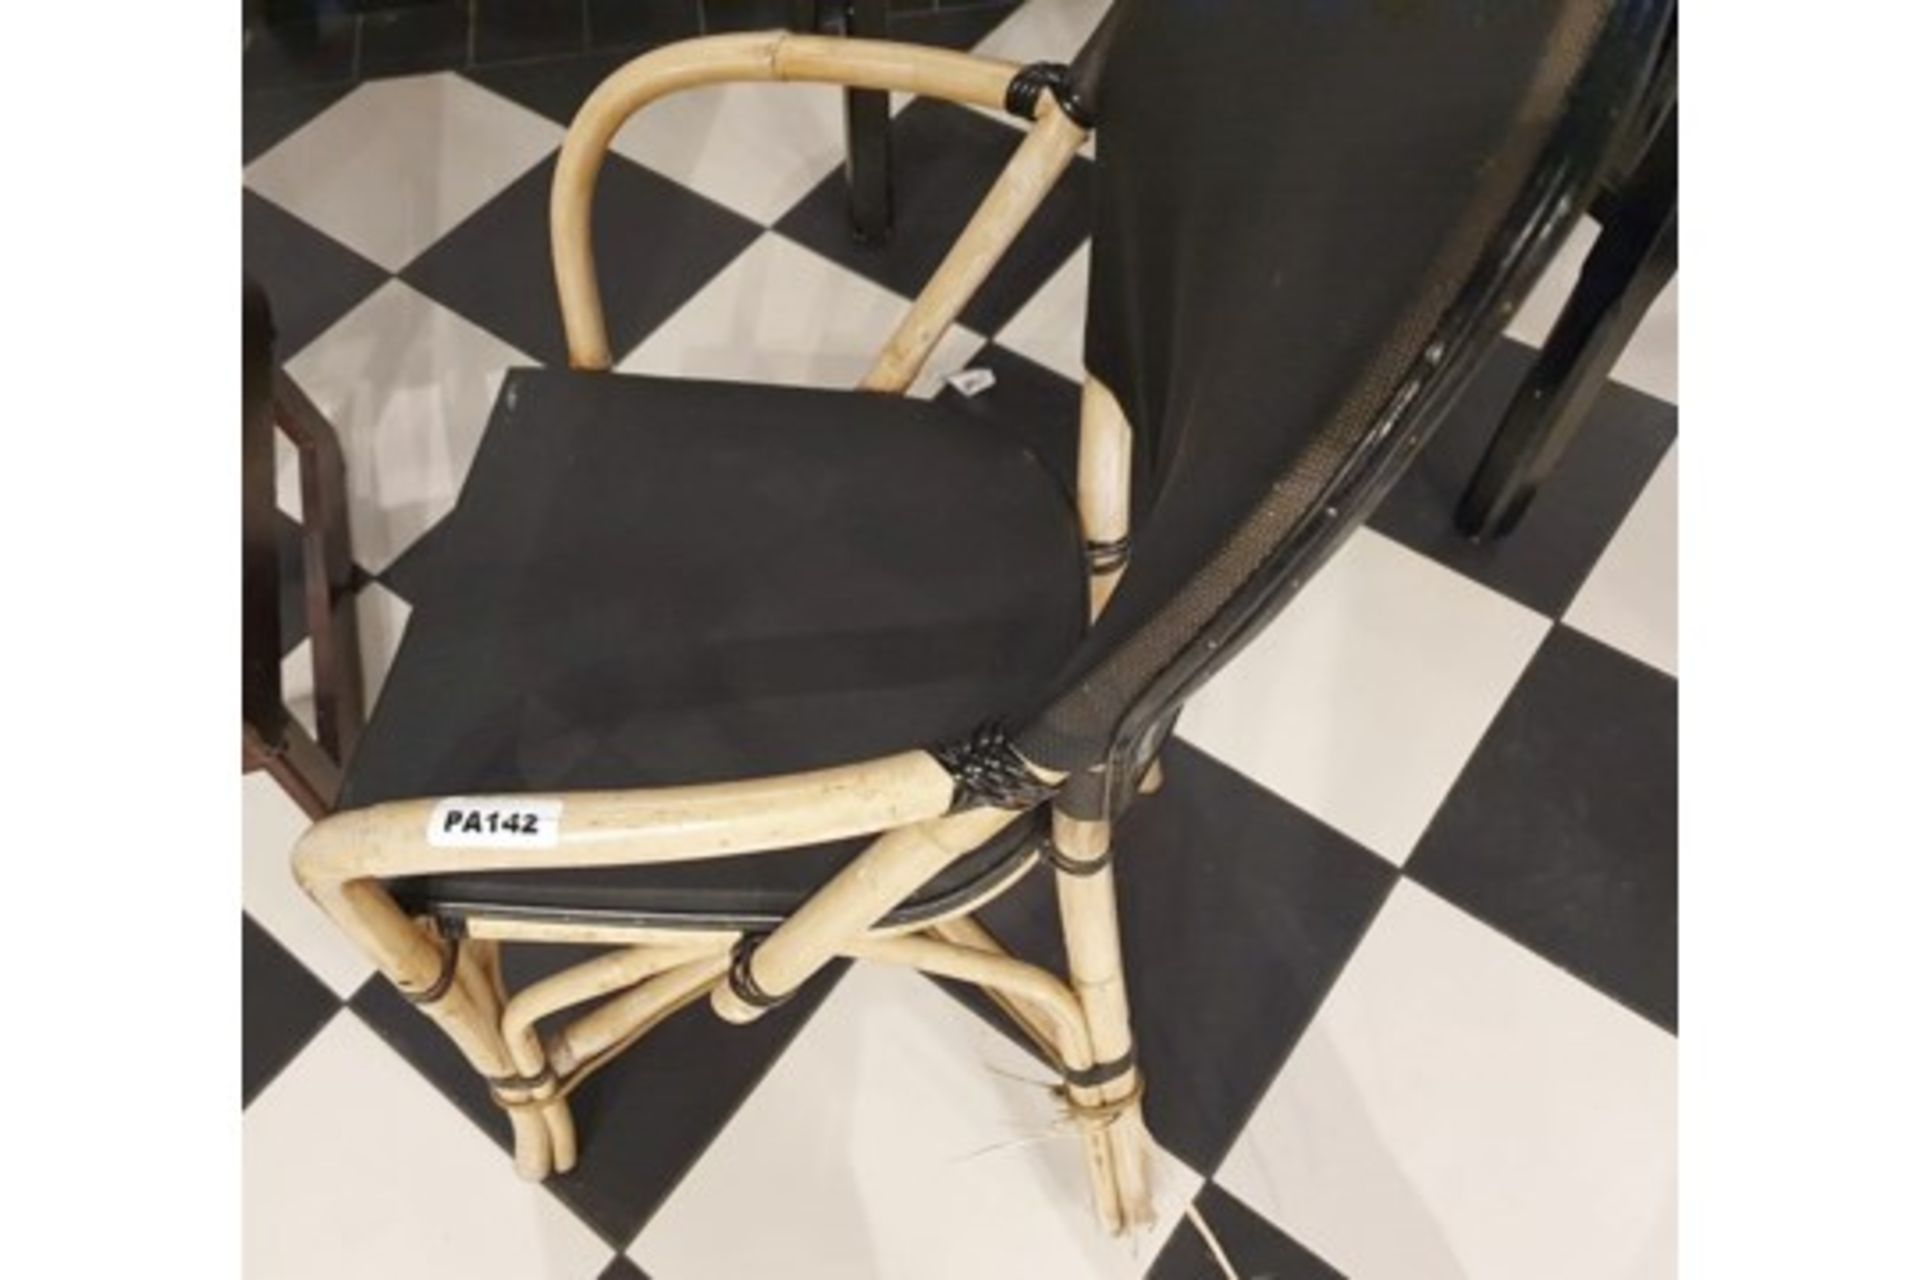 5 x Bamboo Studio Chairs With Black Seat and Back Rest - Dimensions: H44/88 x W54 x D39 cms - Image 5 of 5